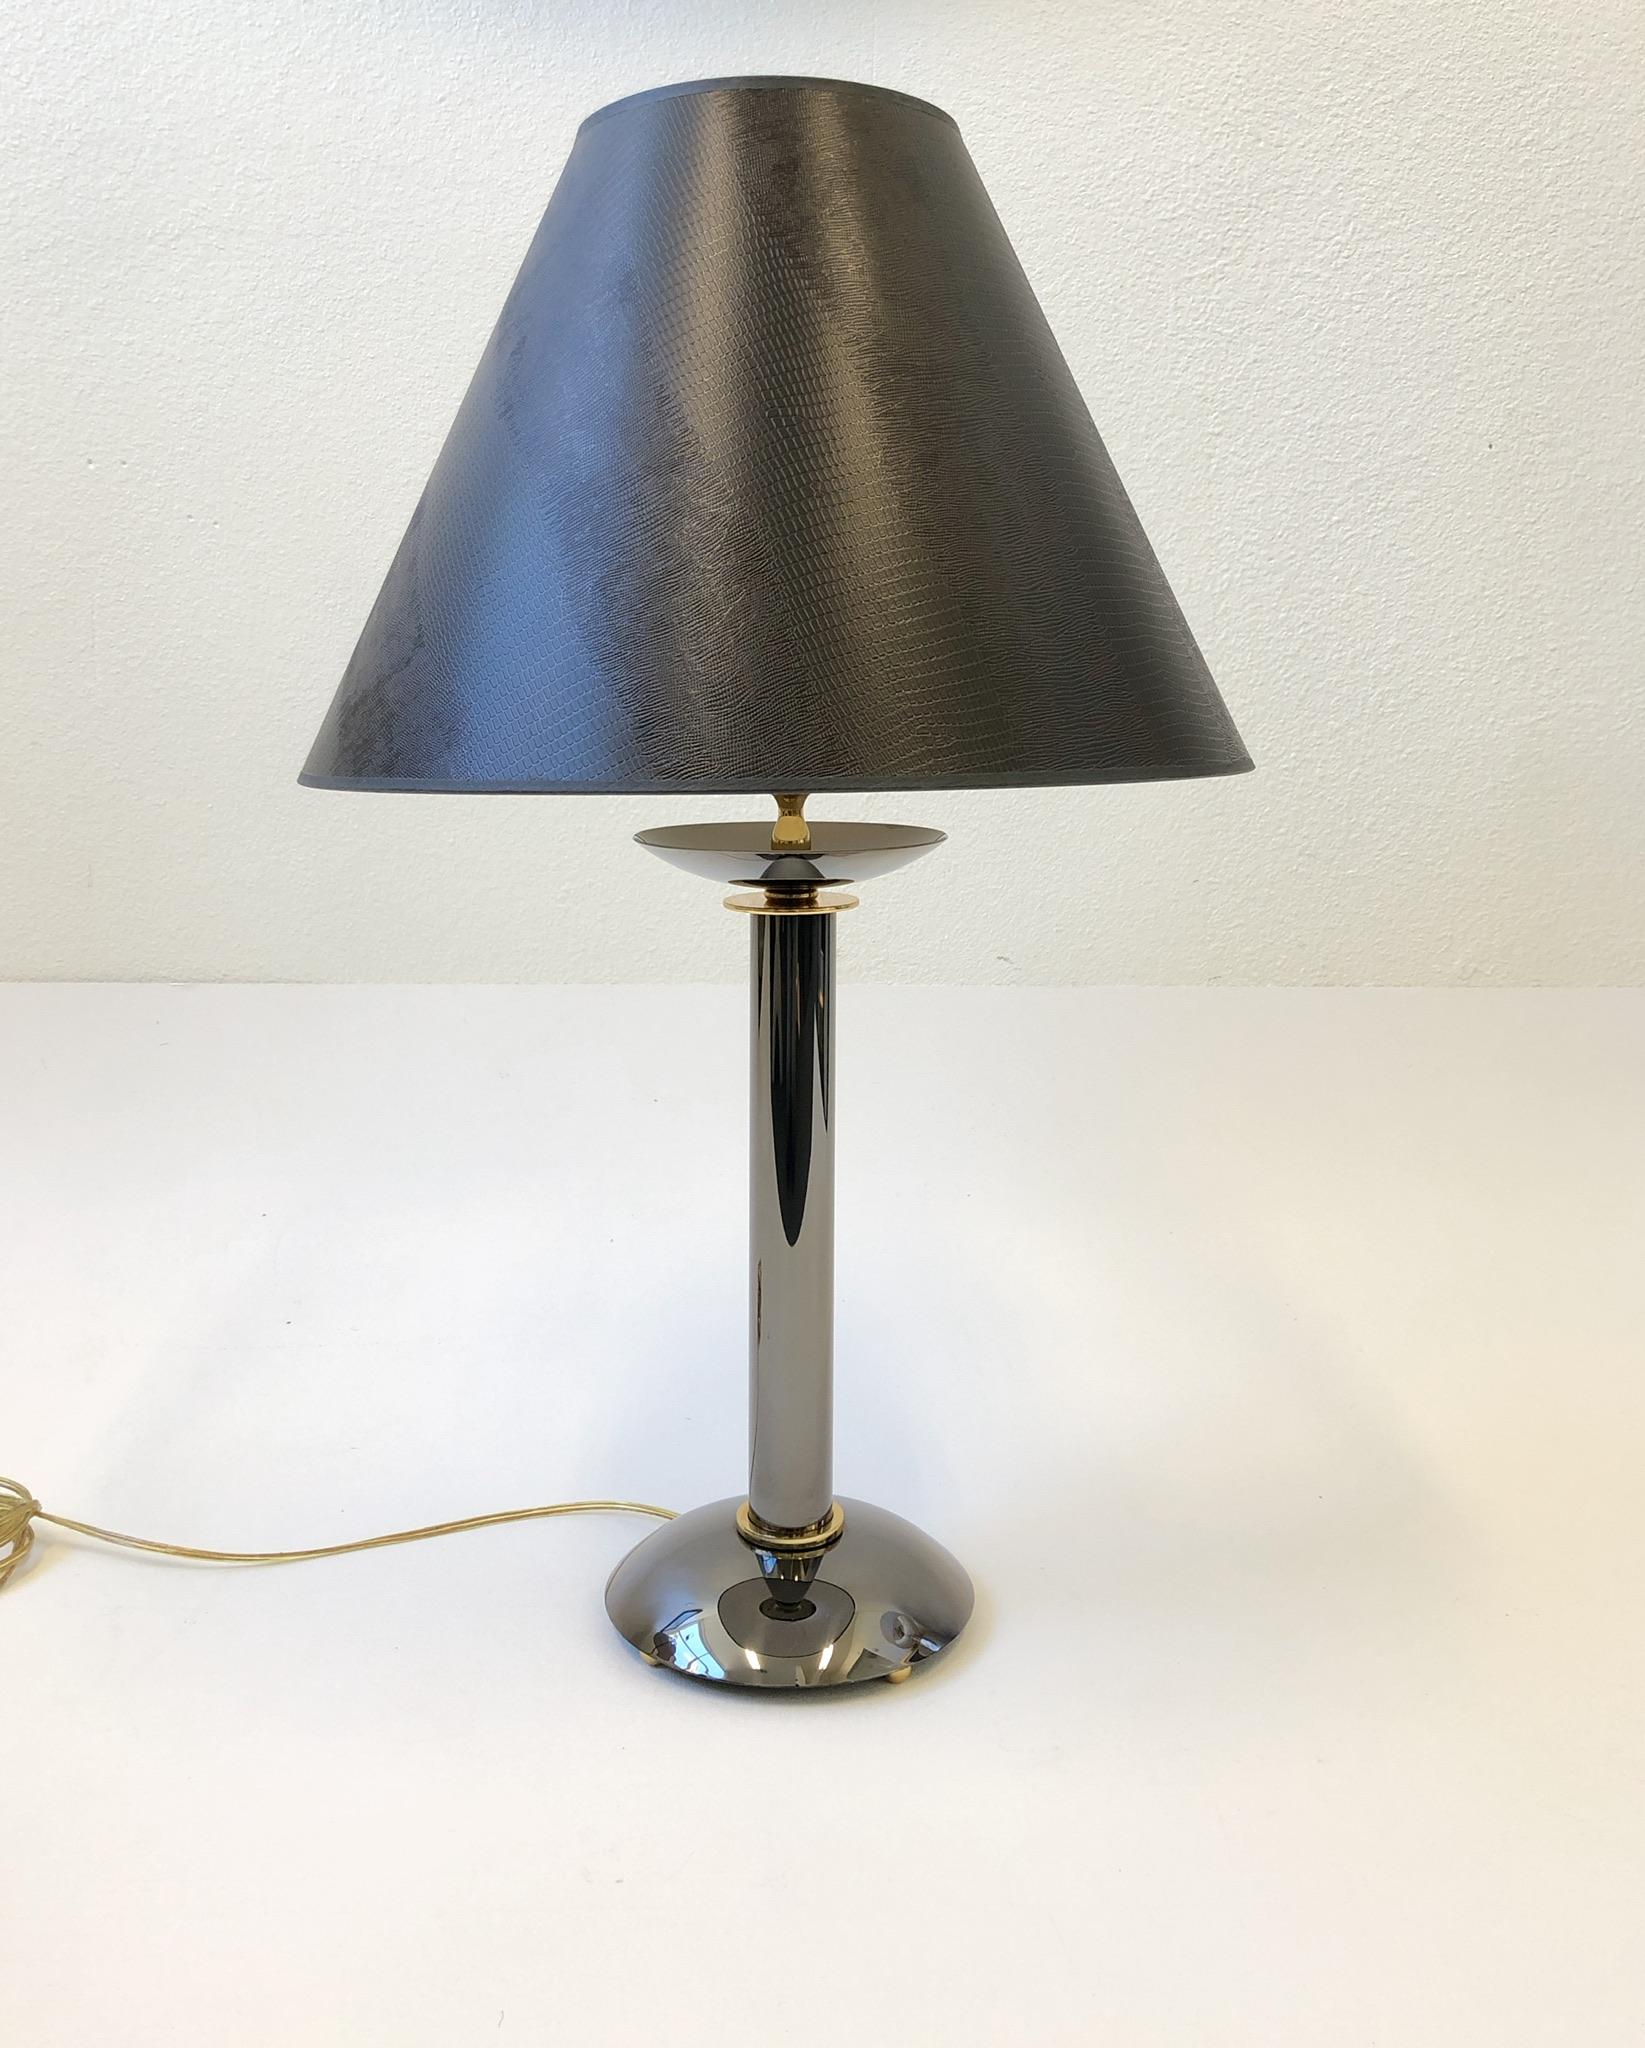 A rare pair of gunmetal and brass table lamps design by Karl Pringer in the 1980s. It’s rare to find this as lamps, they are usually candlesticks. They have been newly rewired with new hardware and new dark brown faux lizard skin lamp